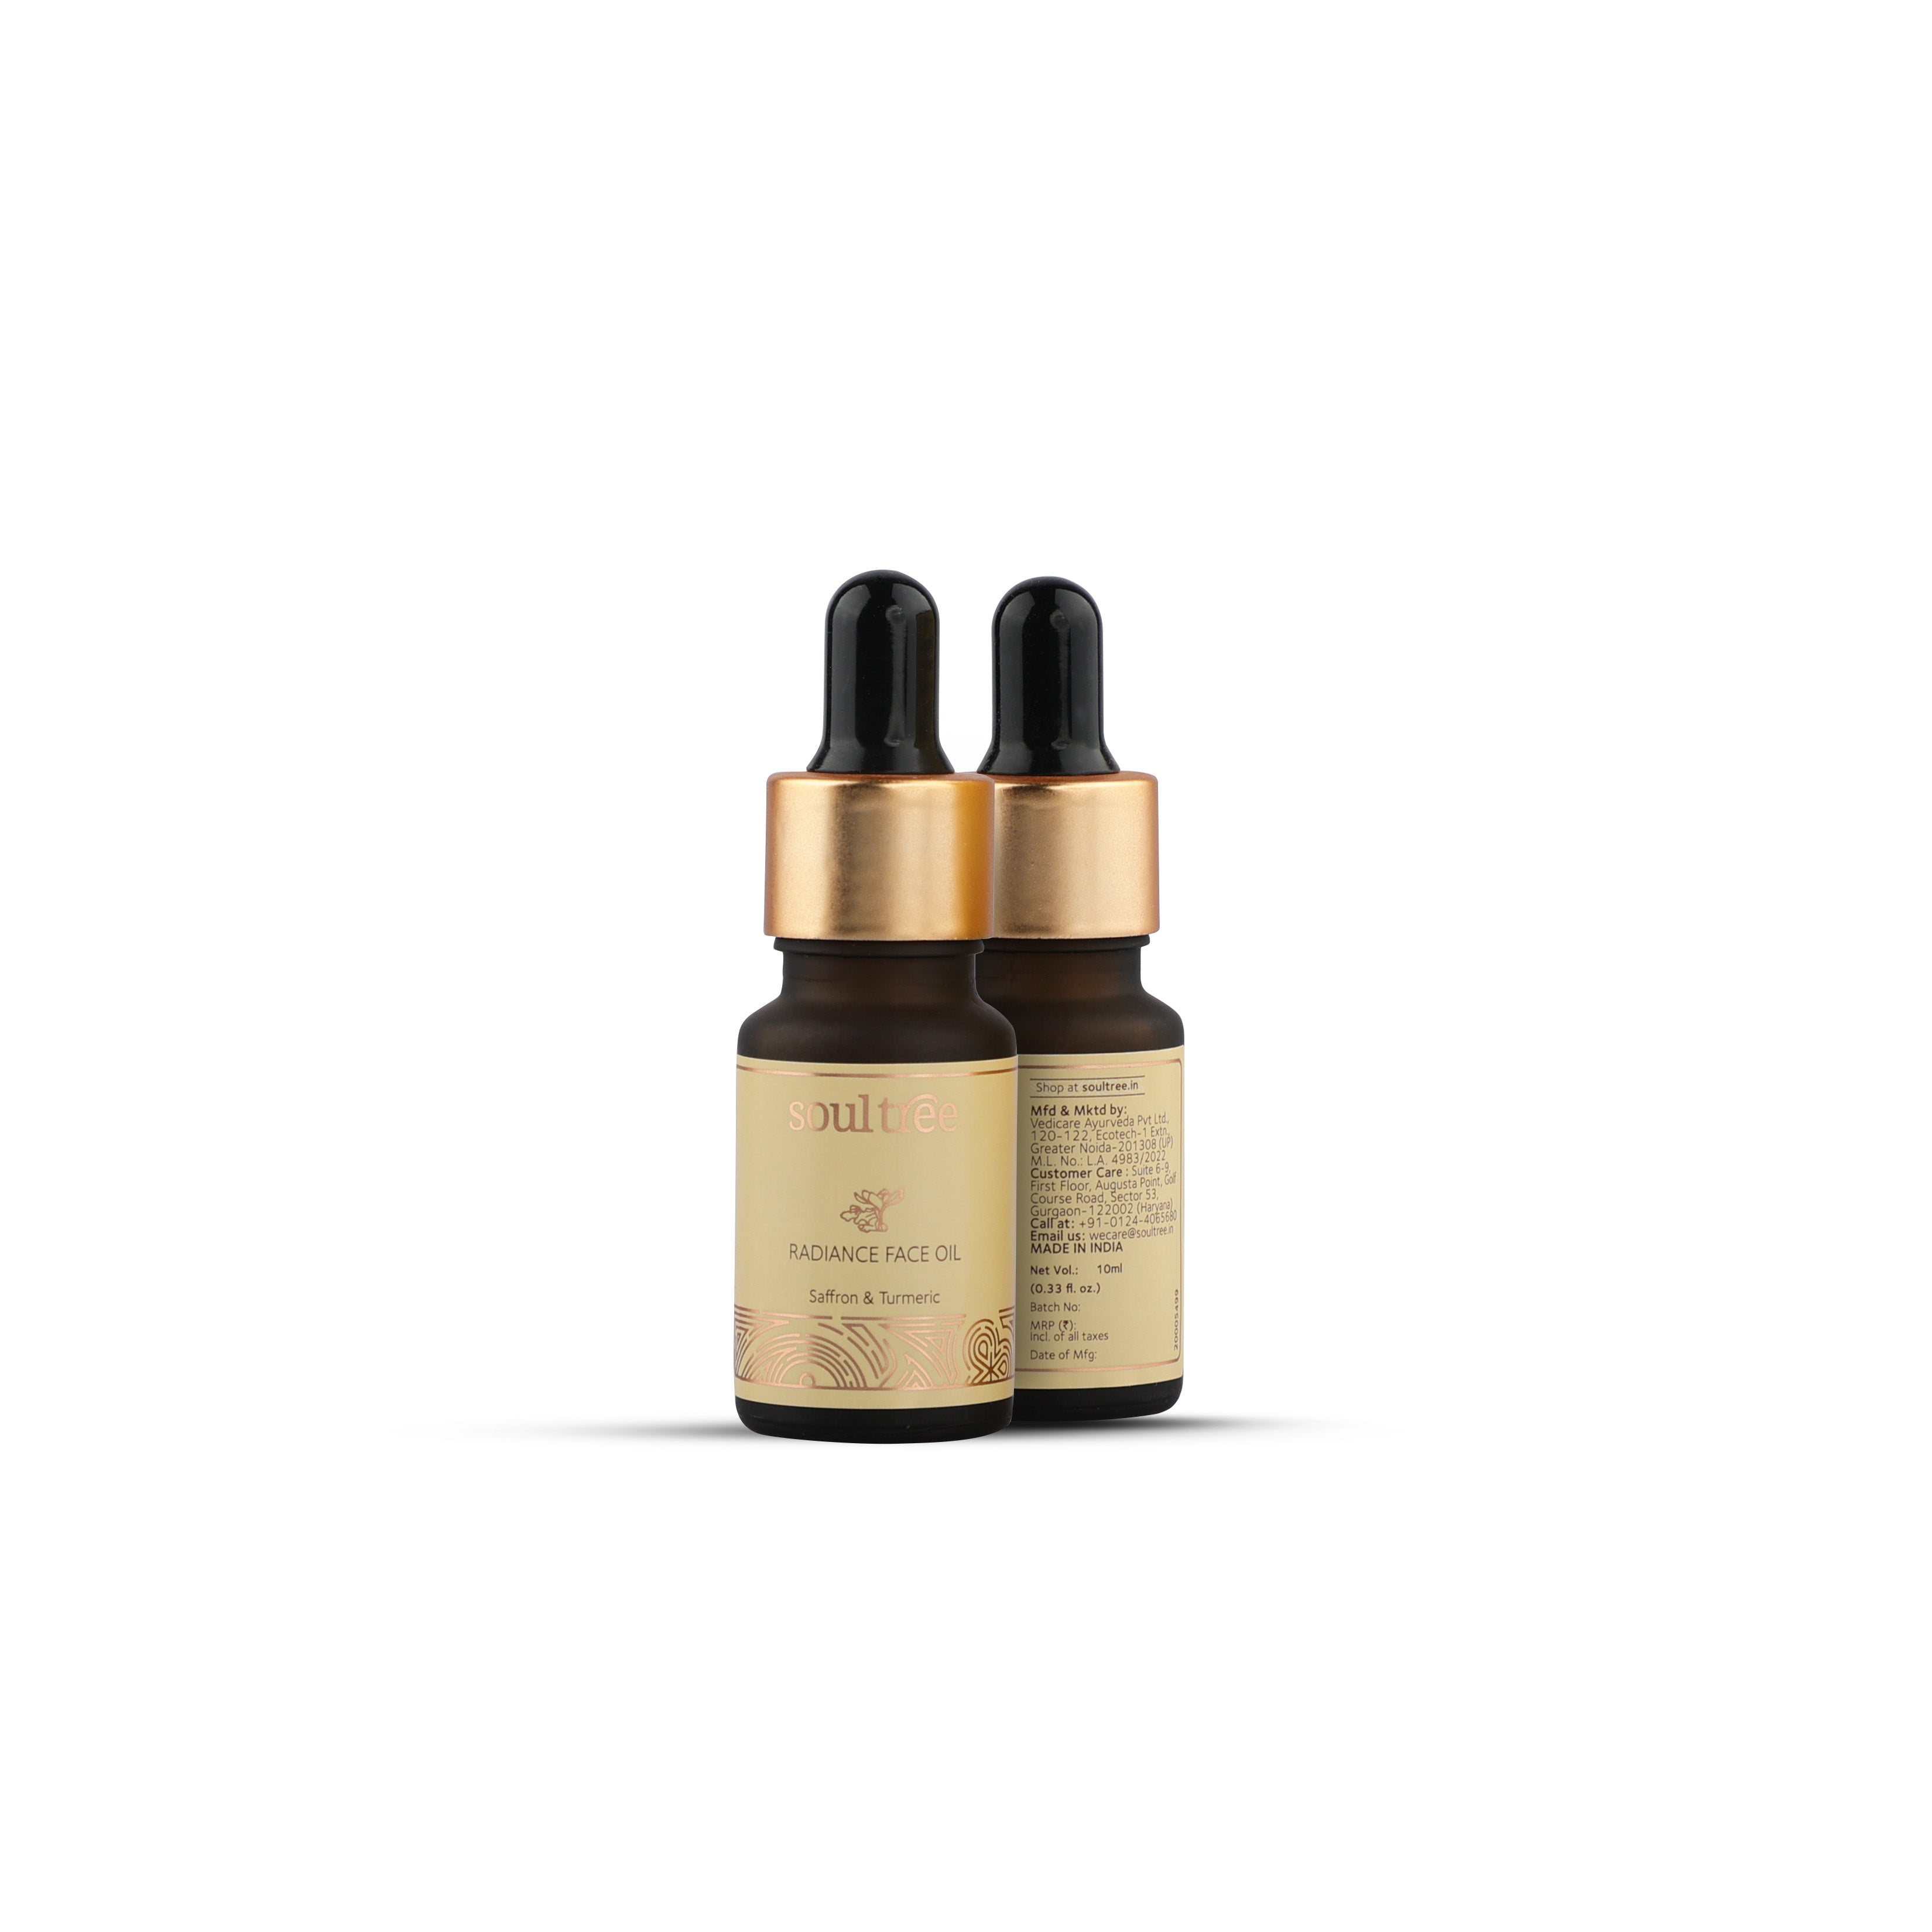 Radiance Face Oil with Saffron & Turmeric - SoulTree